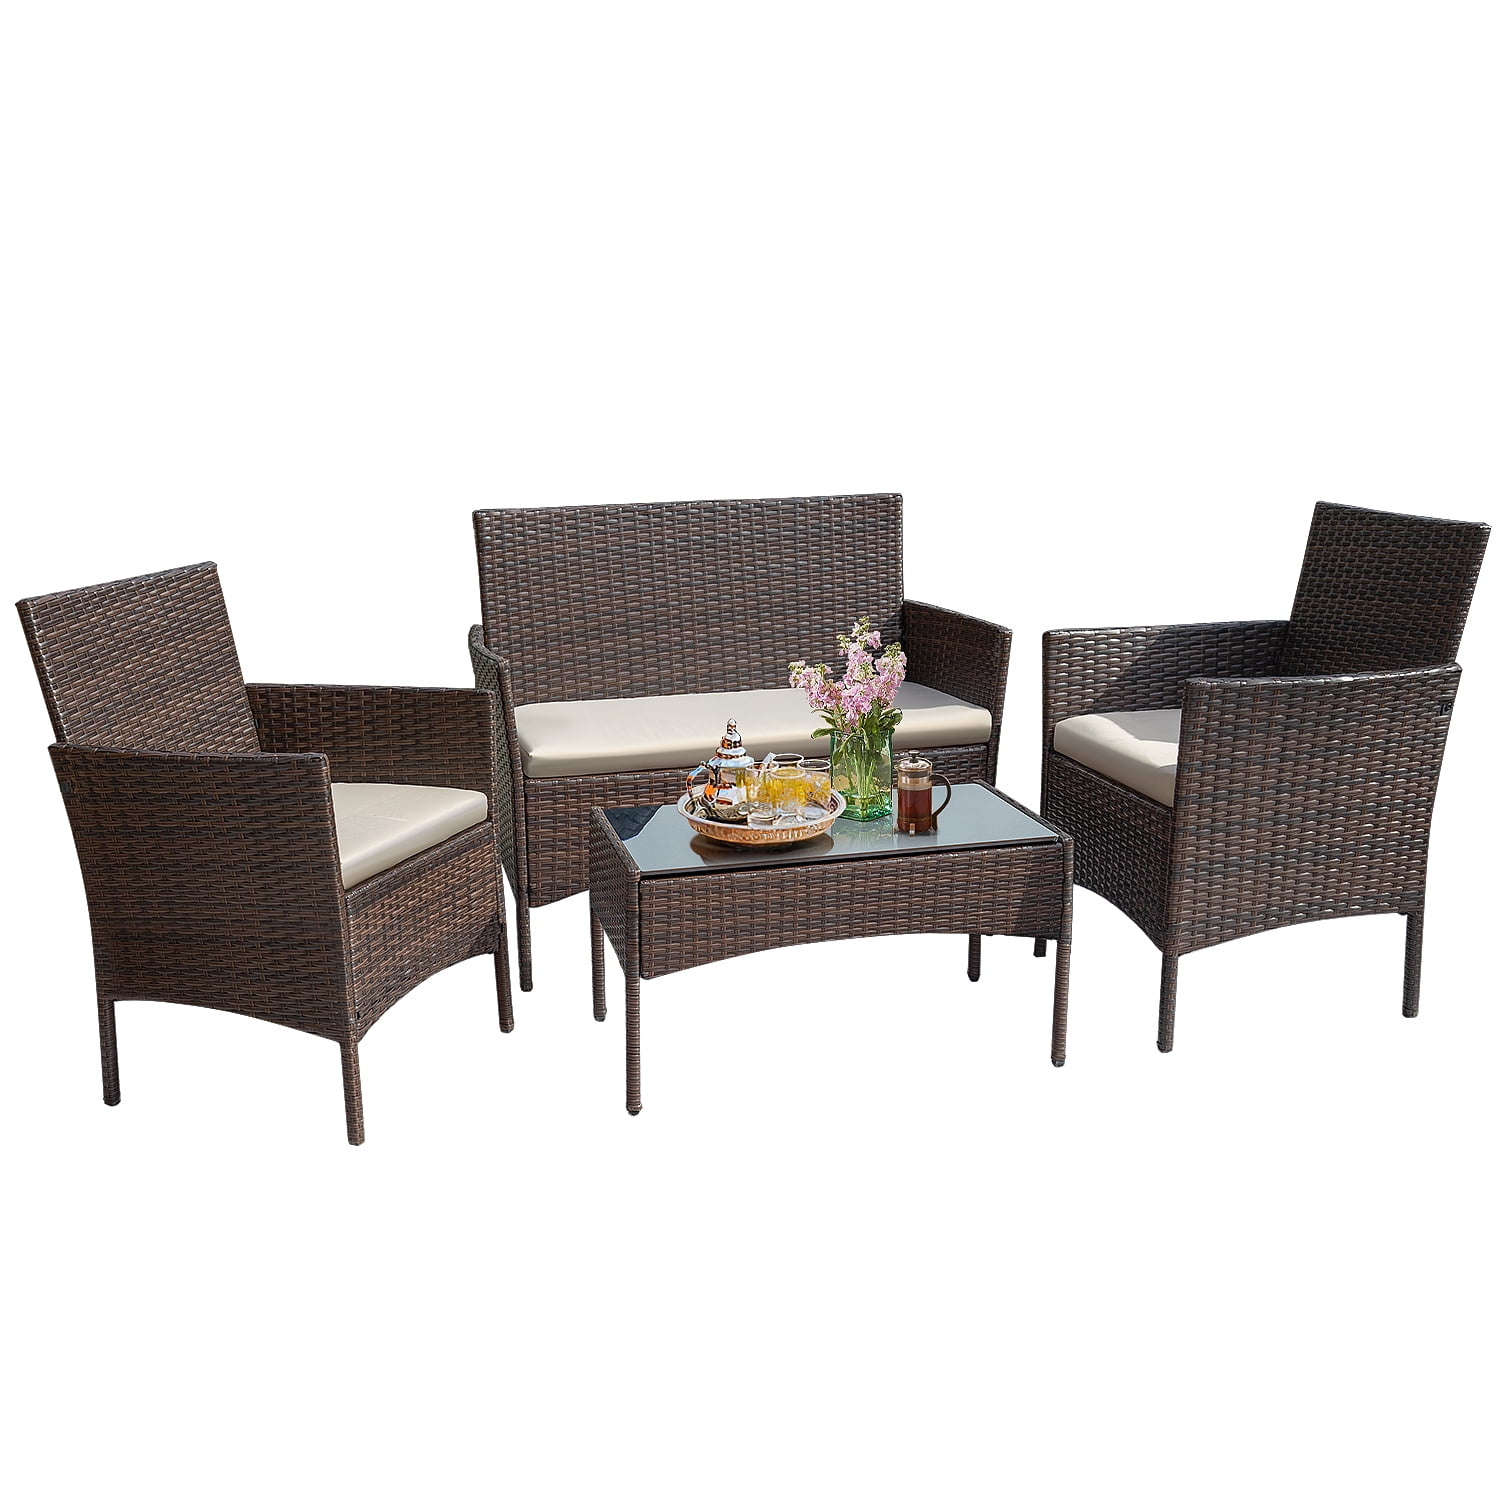 Longrune 4 Piece Outdoor Rattan Patio Furniture Set Wicker Conversation Sofa Chairs with Cushions and Glass Table Brown for Porch Backyard Outside Use 